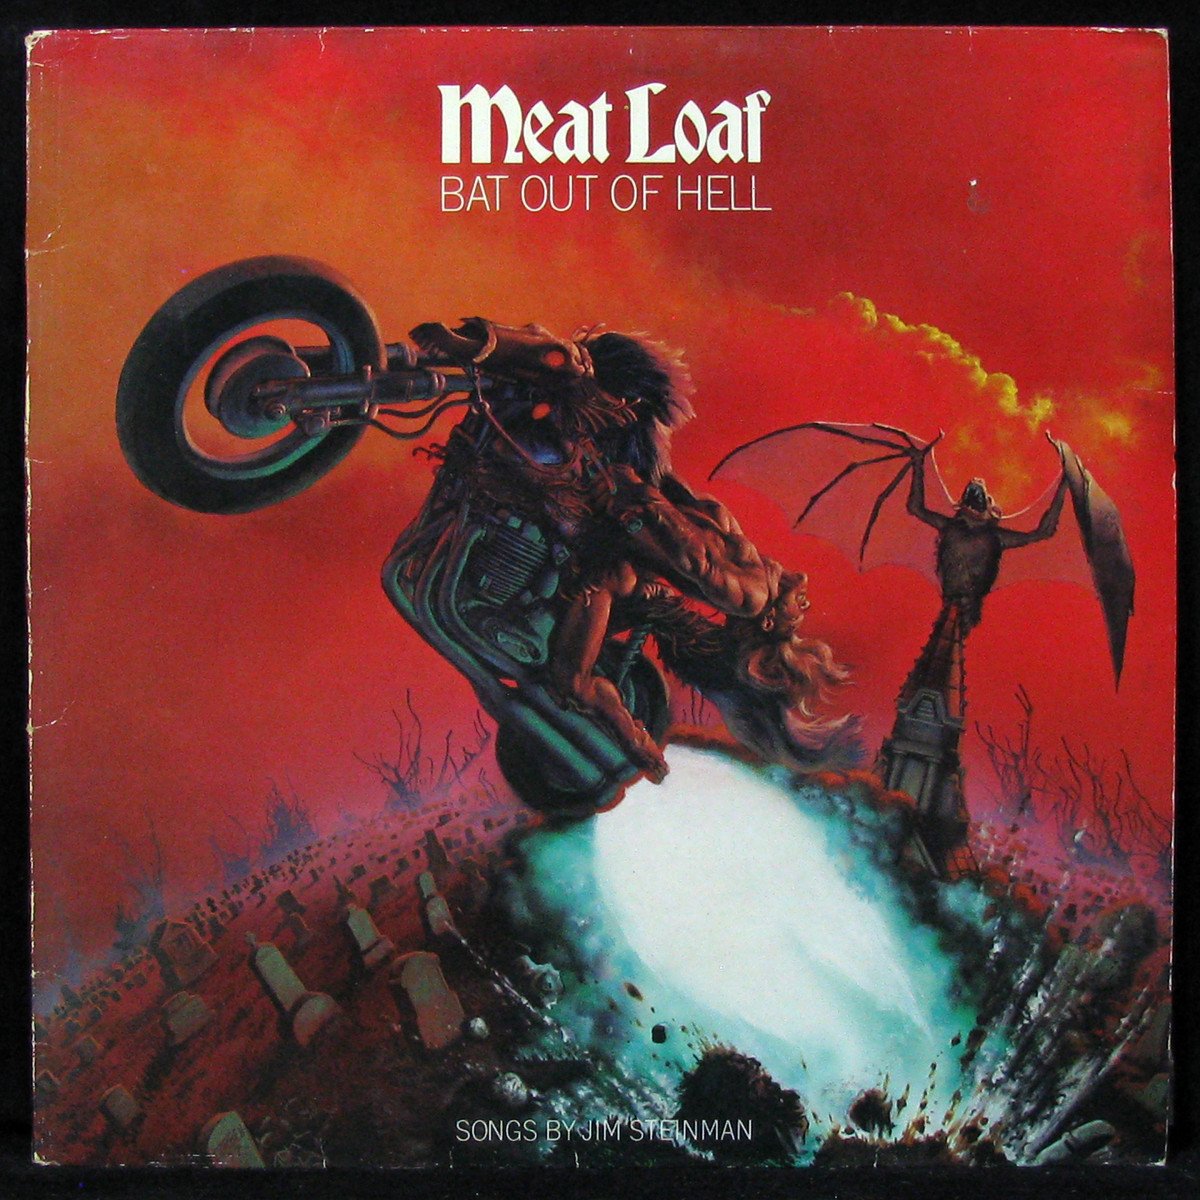 Bat Out Of Hell